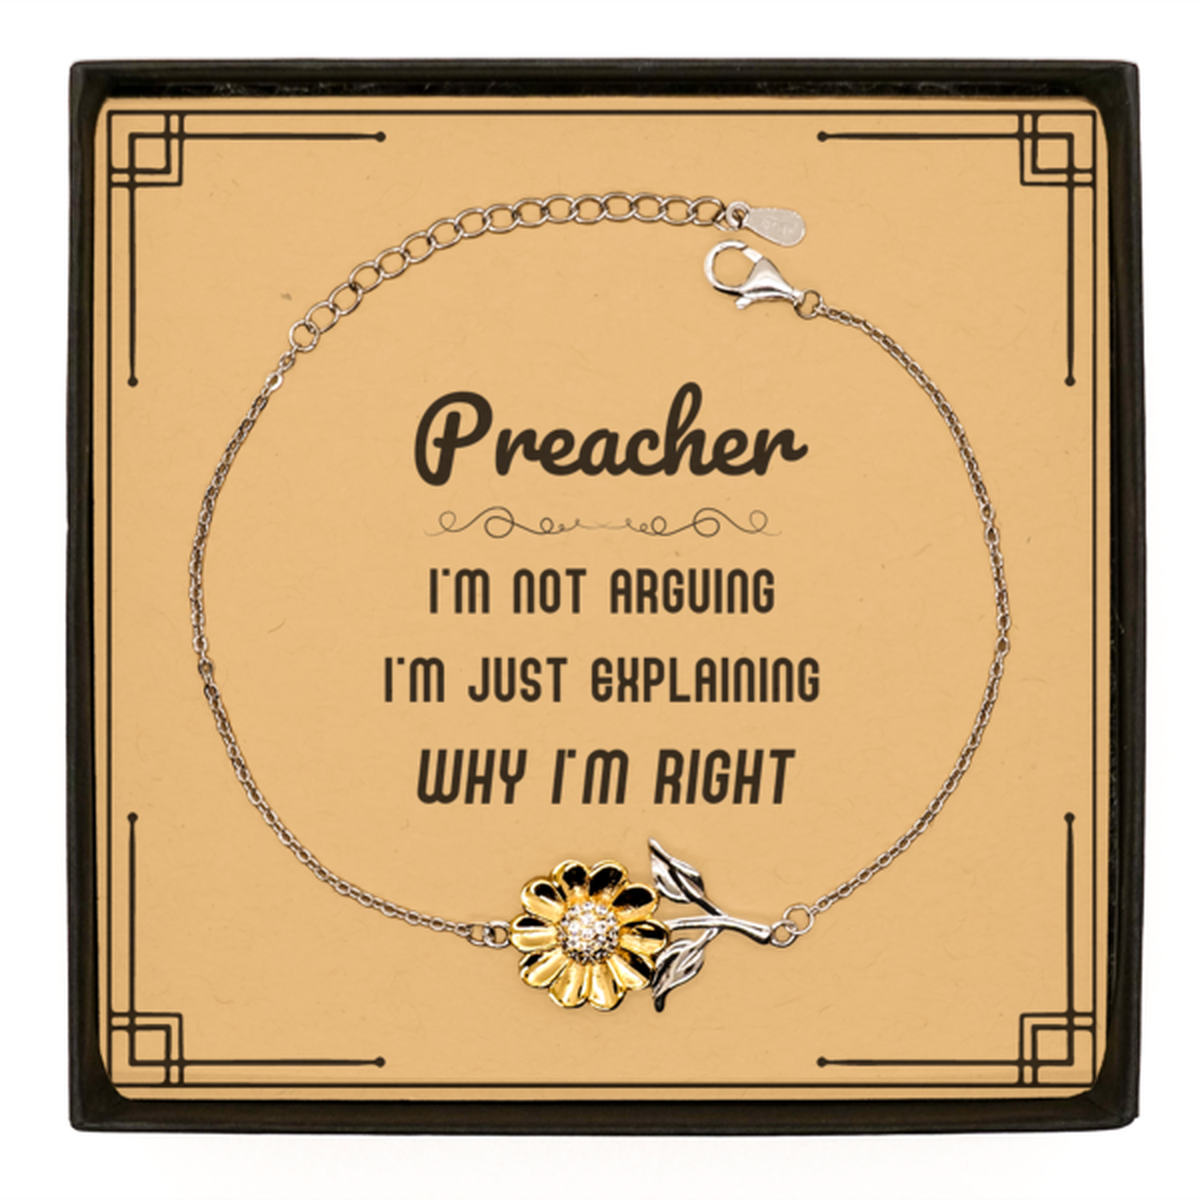 Preacher I'm not Arguing. I'm Just Explaining Why I'm RIGHT Sunflower Bracelet, Funny Saying Quote Preacher Gifts For Preacher Message Card Graduation Birthday Christmas Gifts for Men Women Coworker